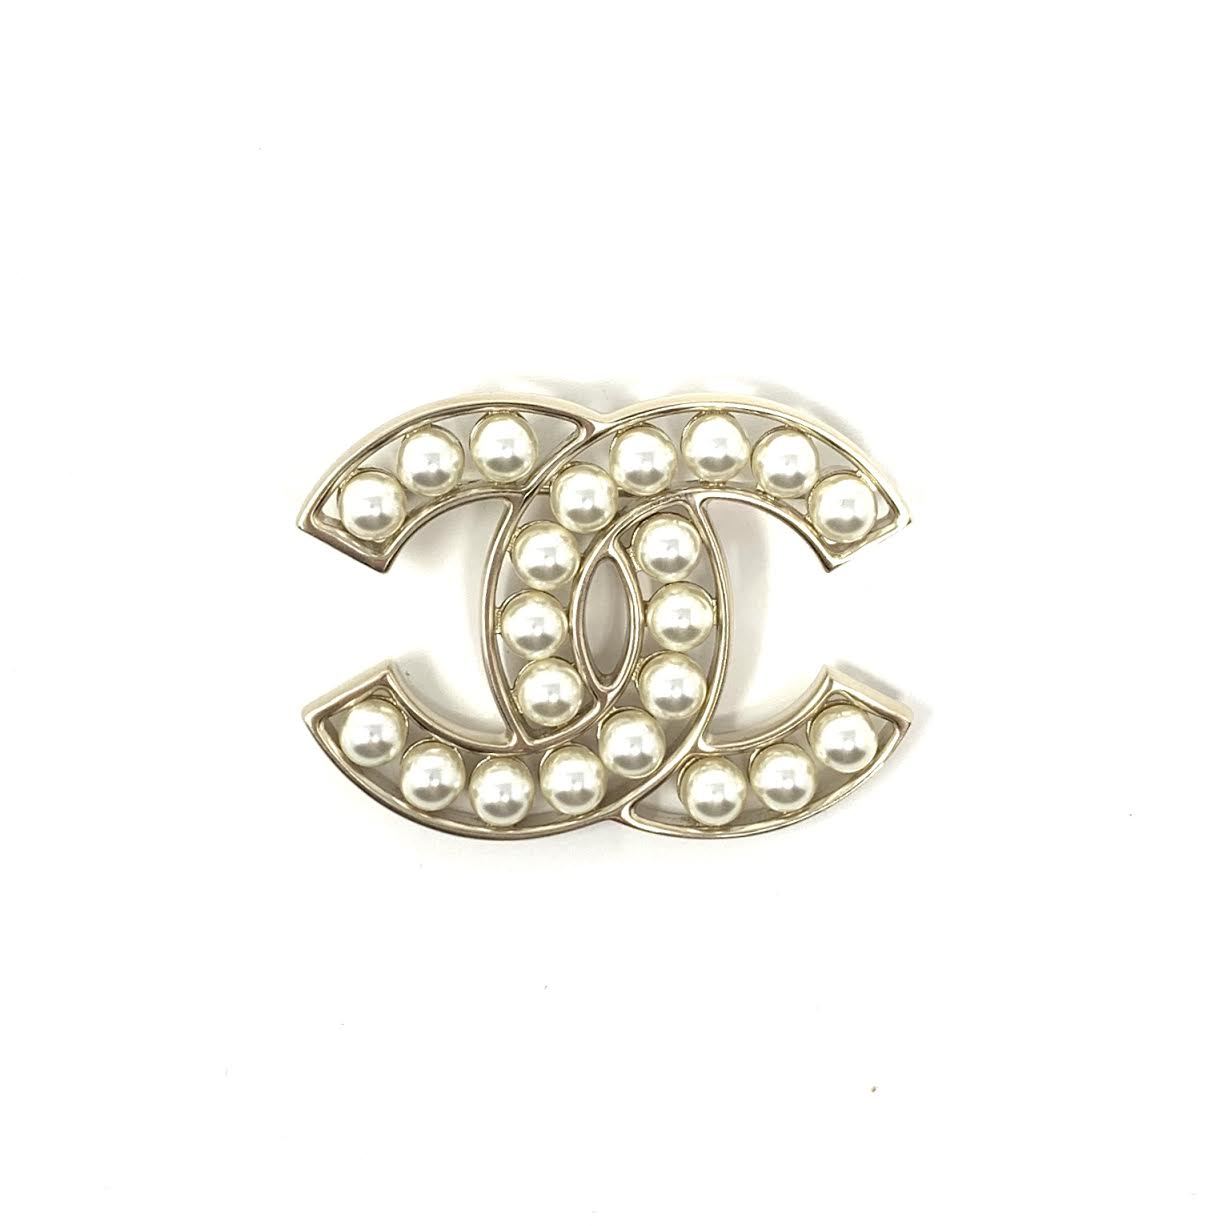 CHANEL Faux Pearl CC Brooch Pin Light Gold 59031